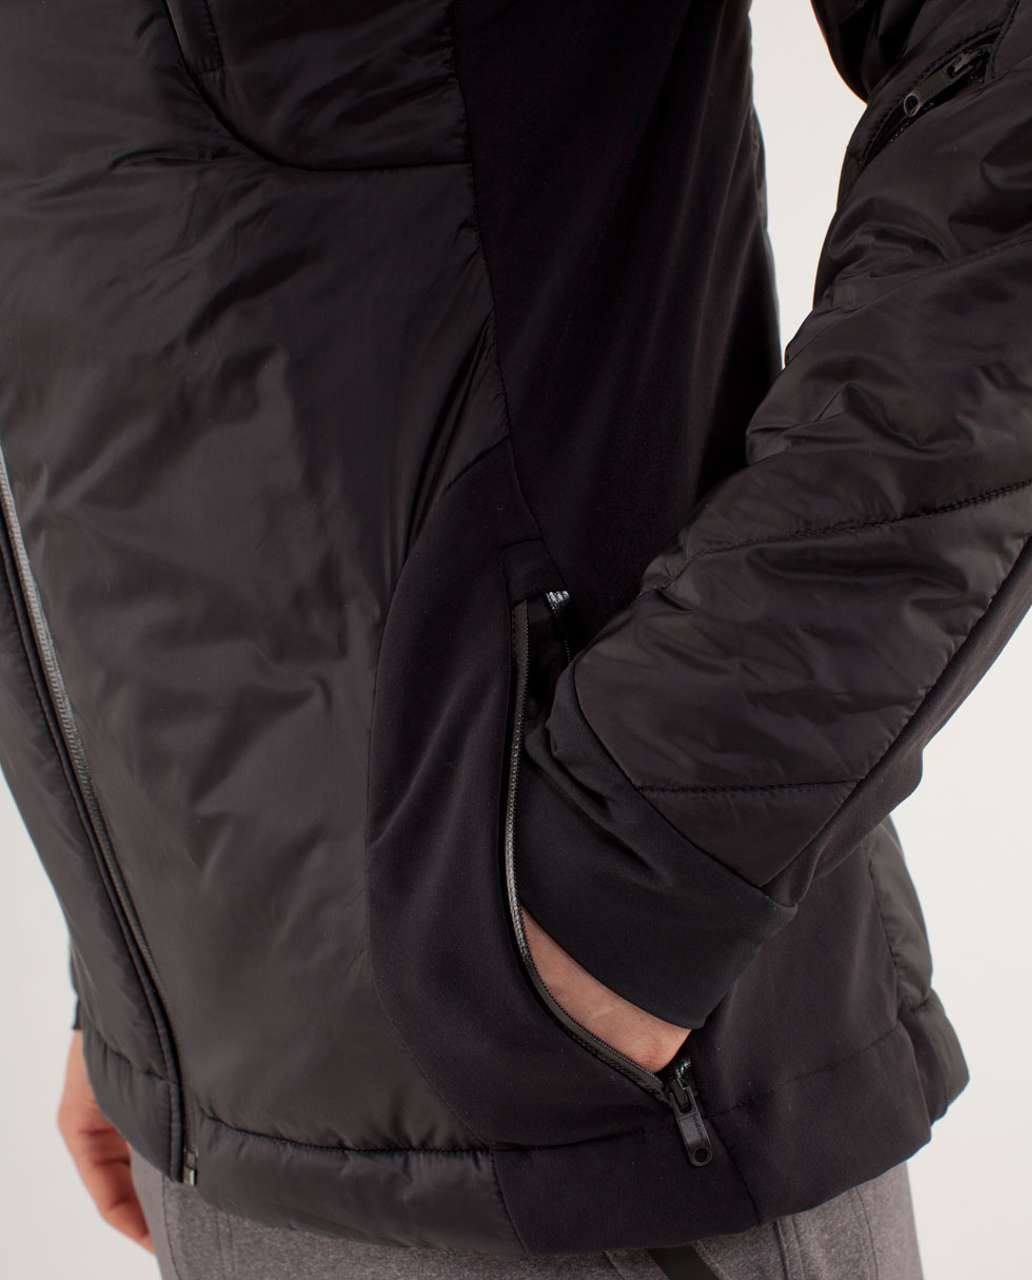 Lululemon Chillstop Quilted Jacket - Black